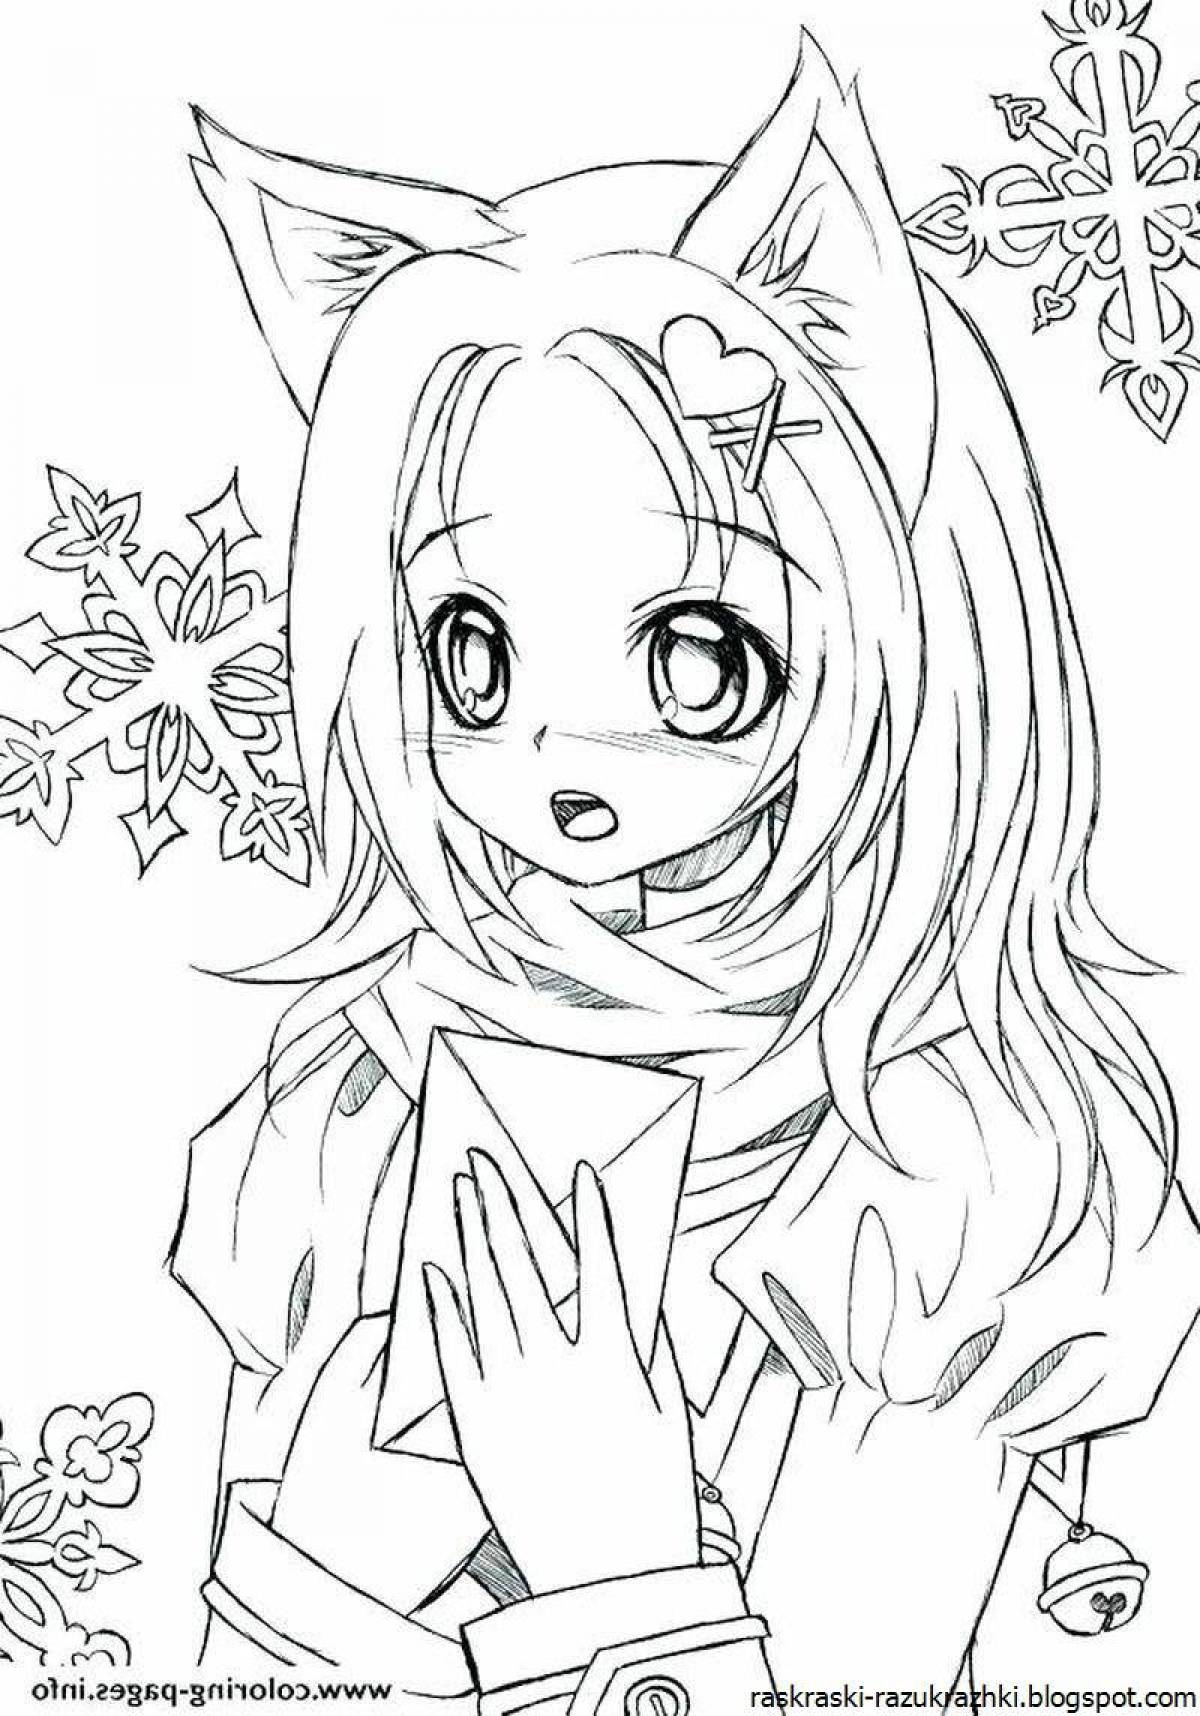 Anime coloring book #17